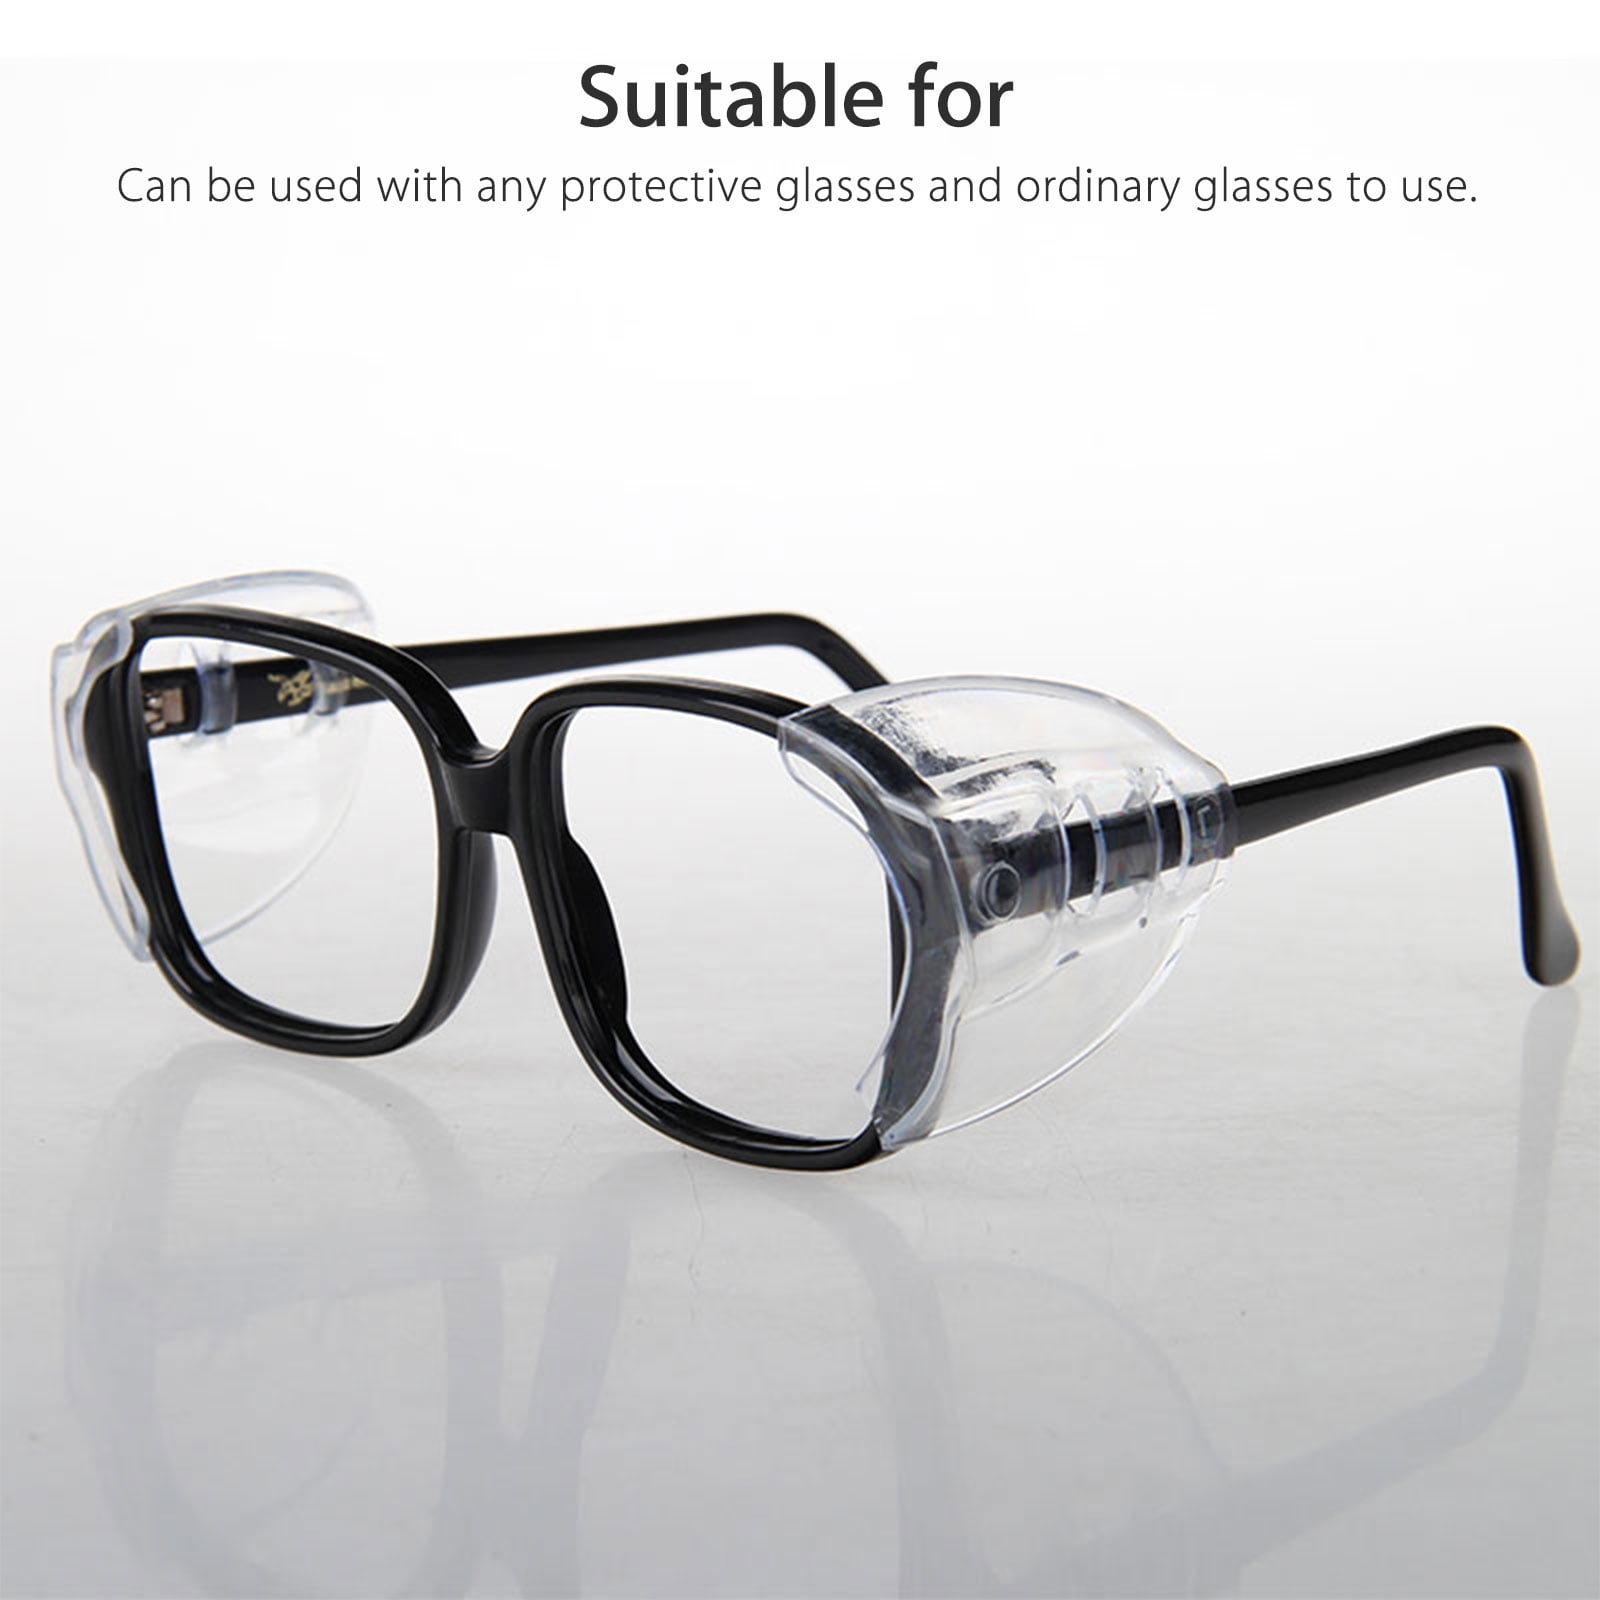 4X Clear Side Shields Universal Fit Flexible For Eye Glasses Safety Glasses #L